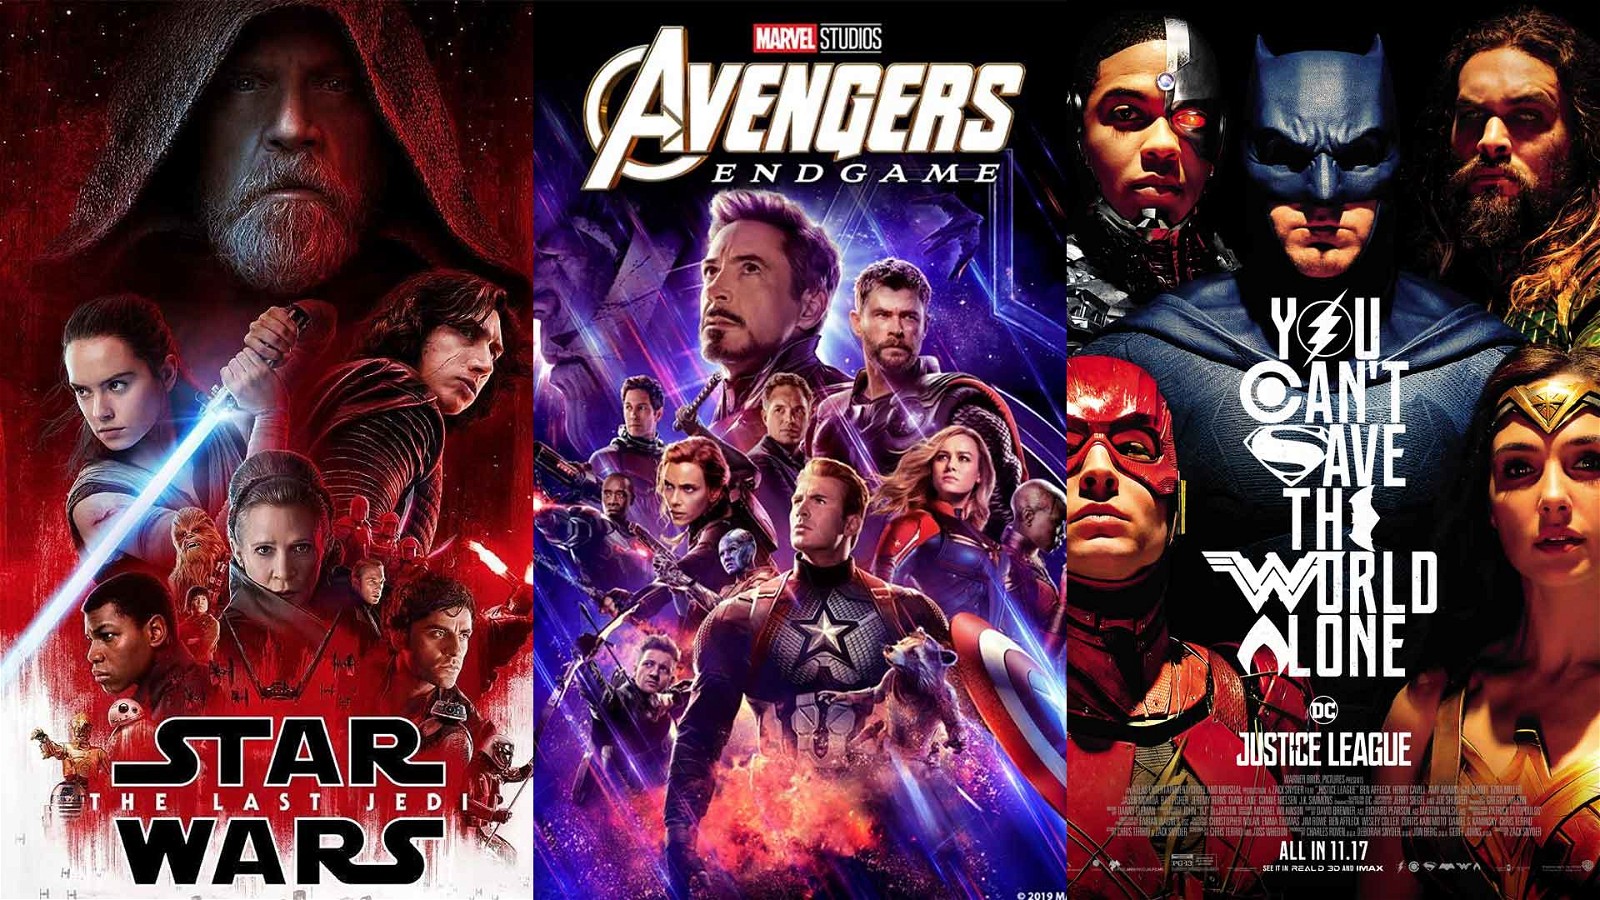 Star Wars, Marvel and DC